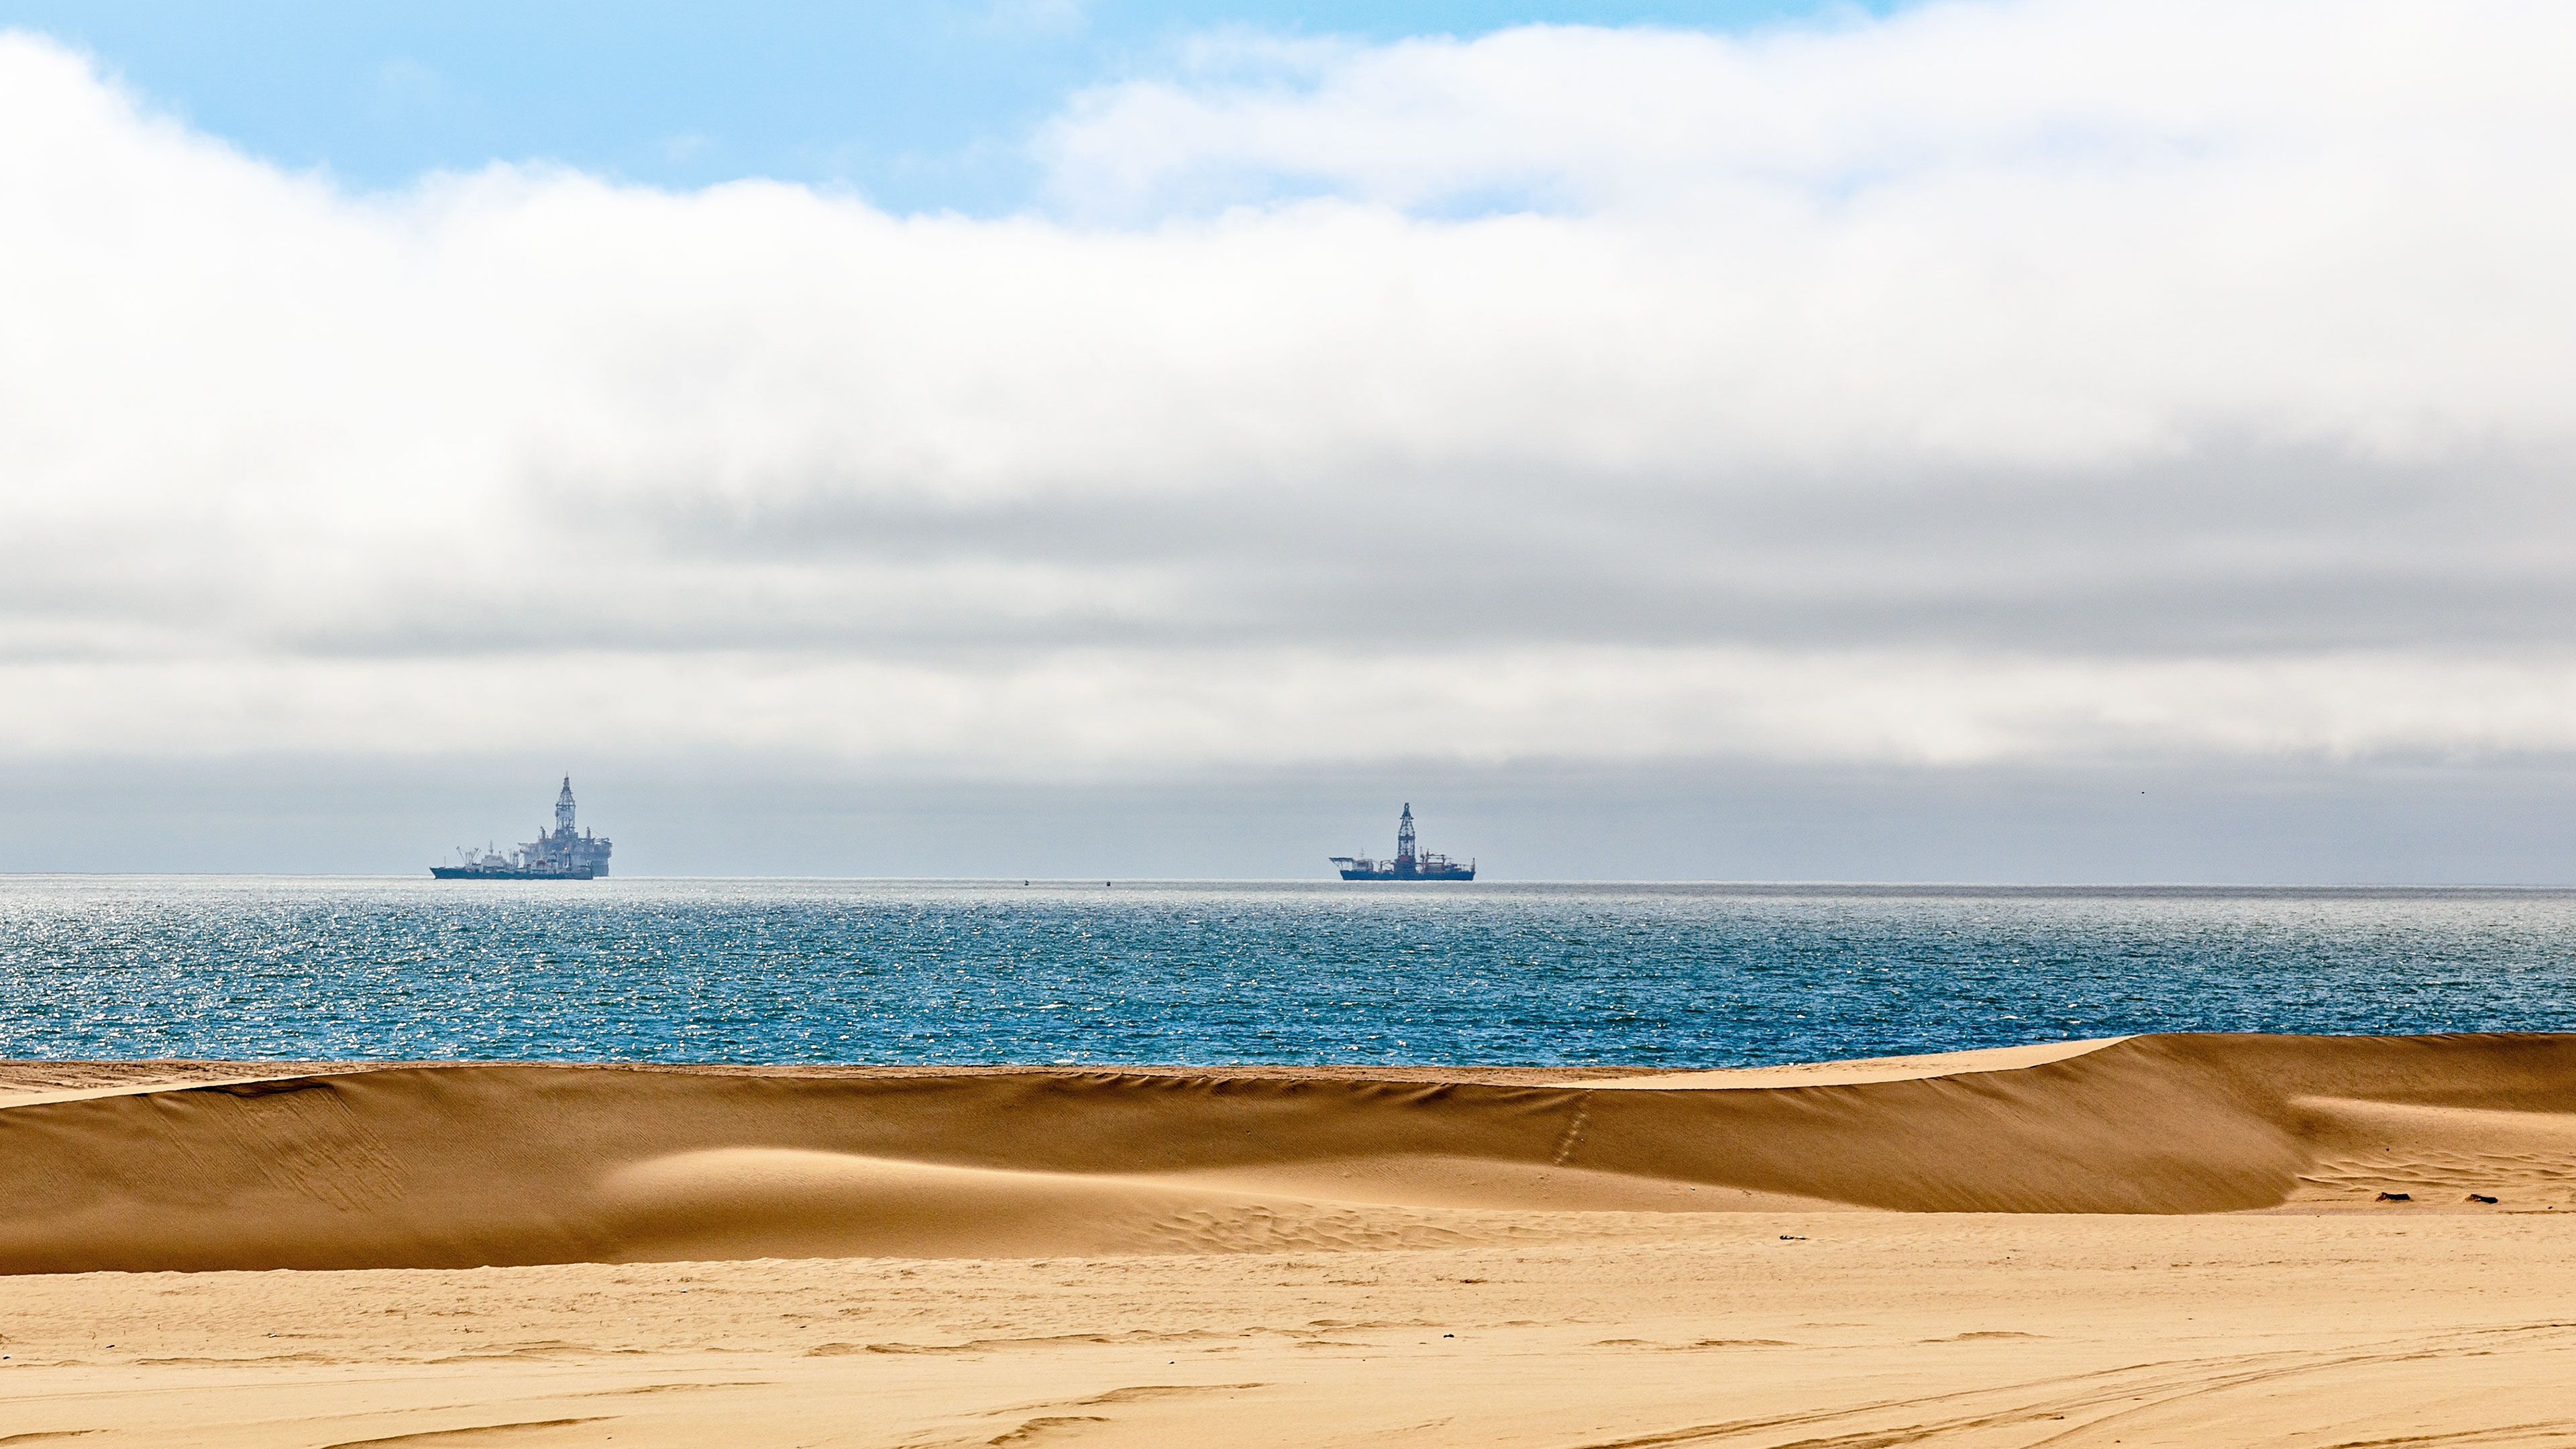 Desert and seaside with offshore oil rigs